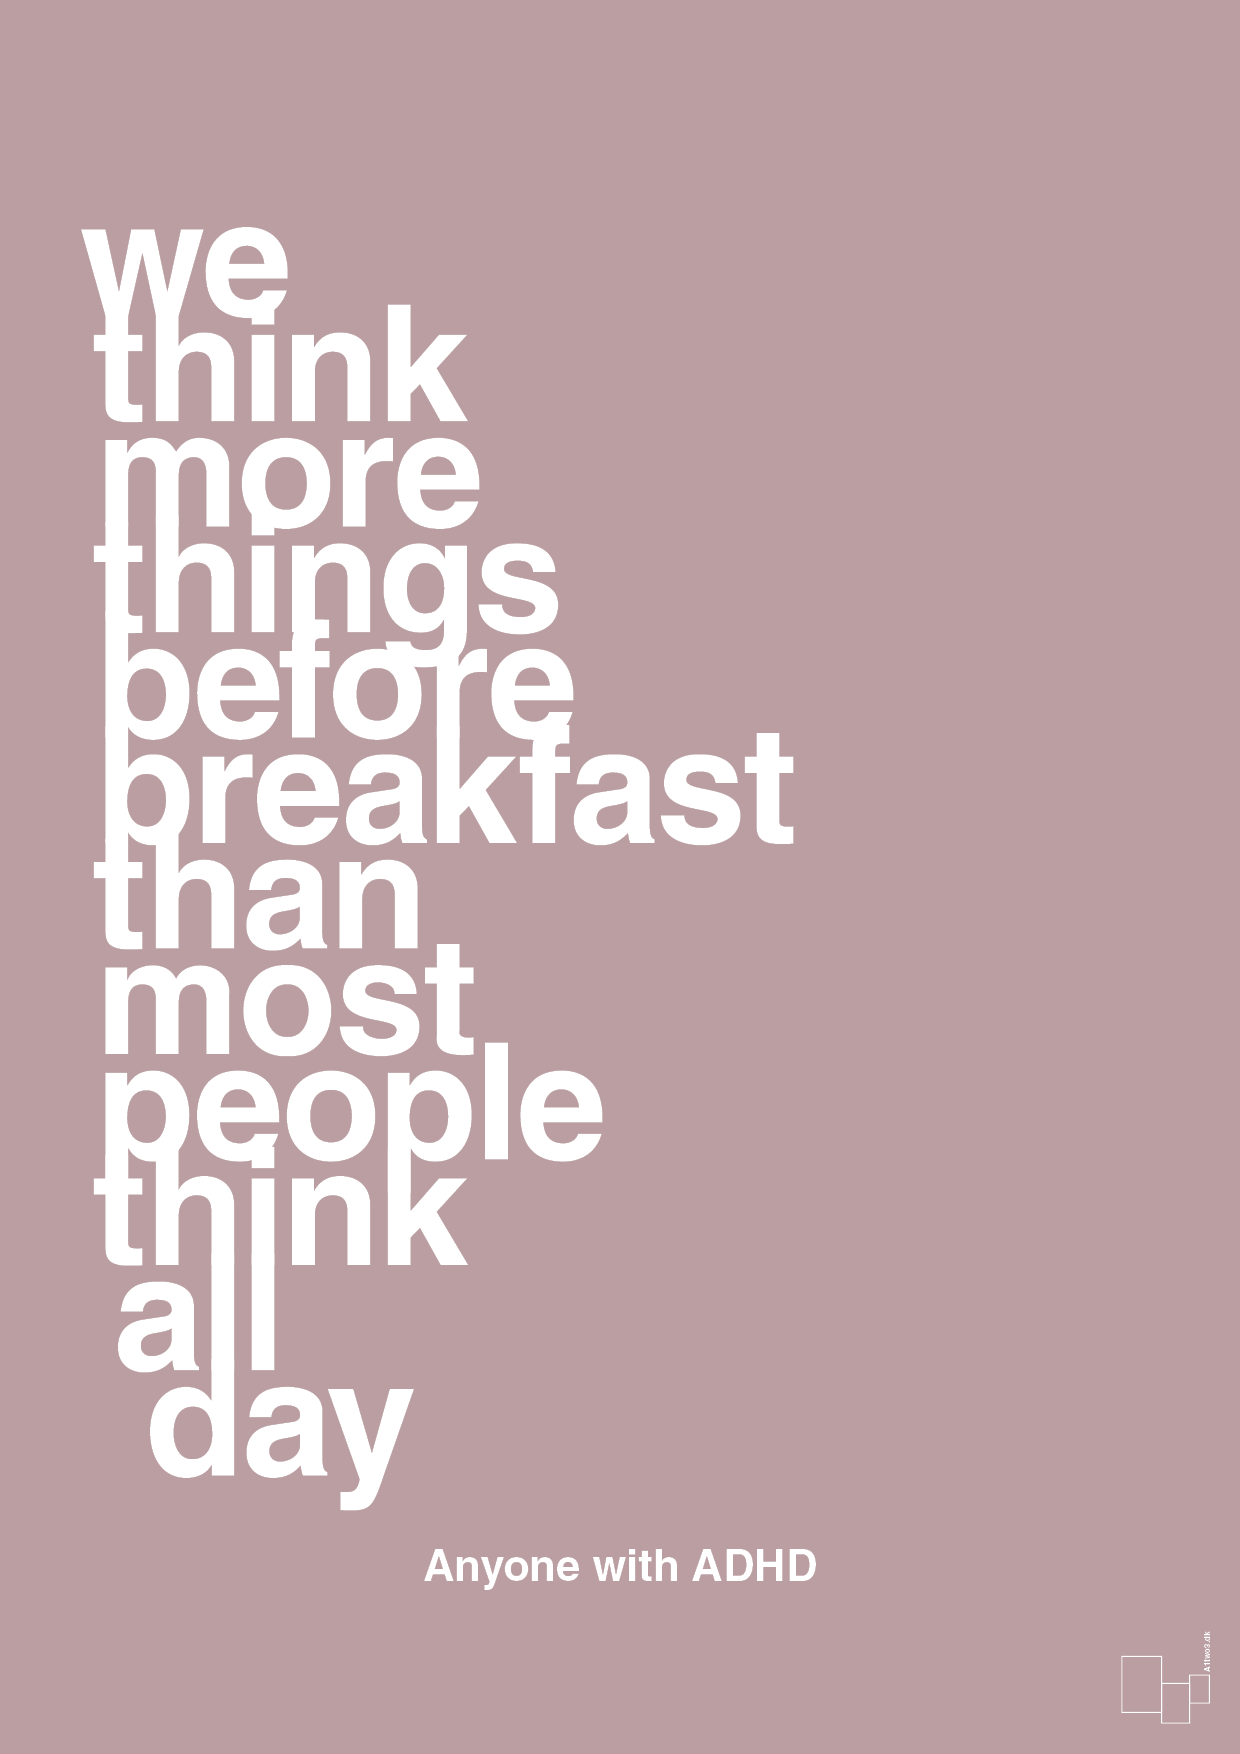 we think more things before breakfast than most people think all day - Plakat med Samfund i Light Rose